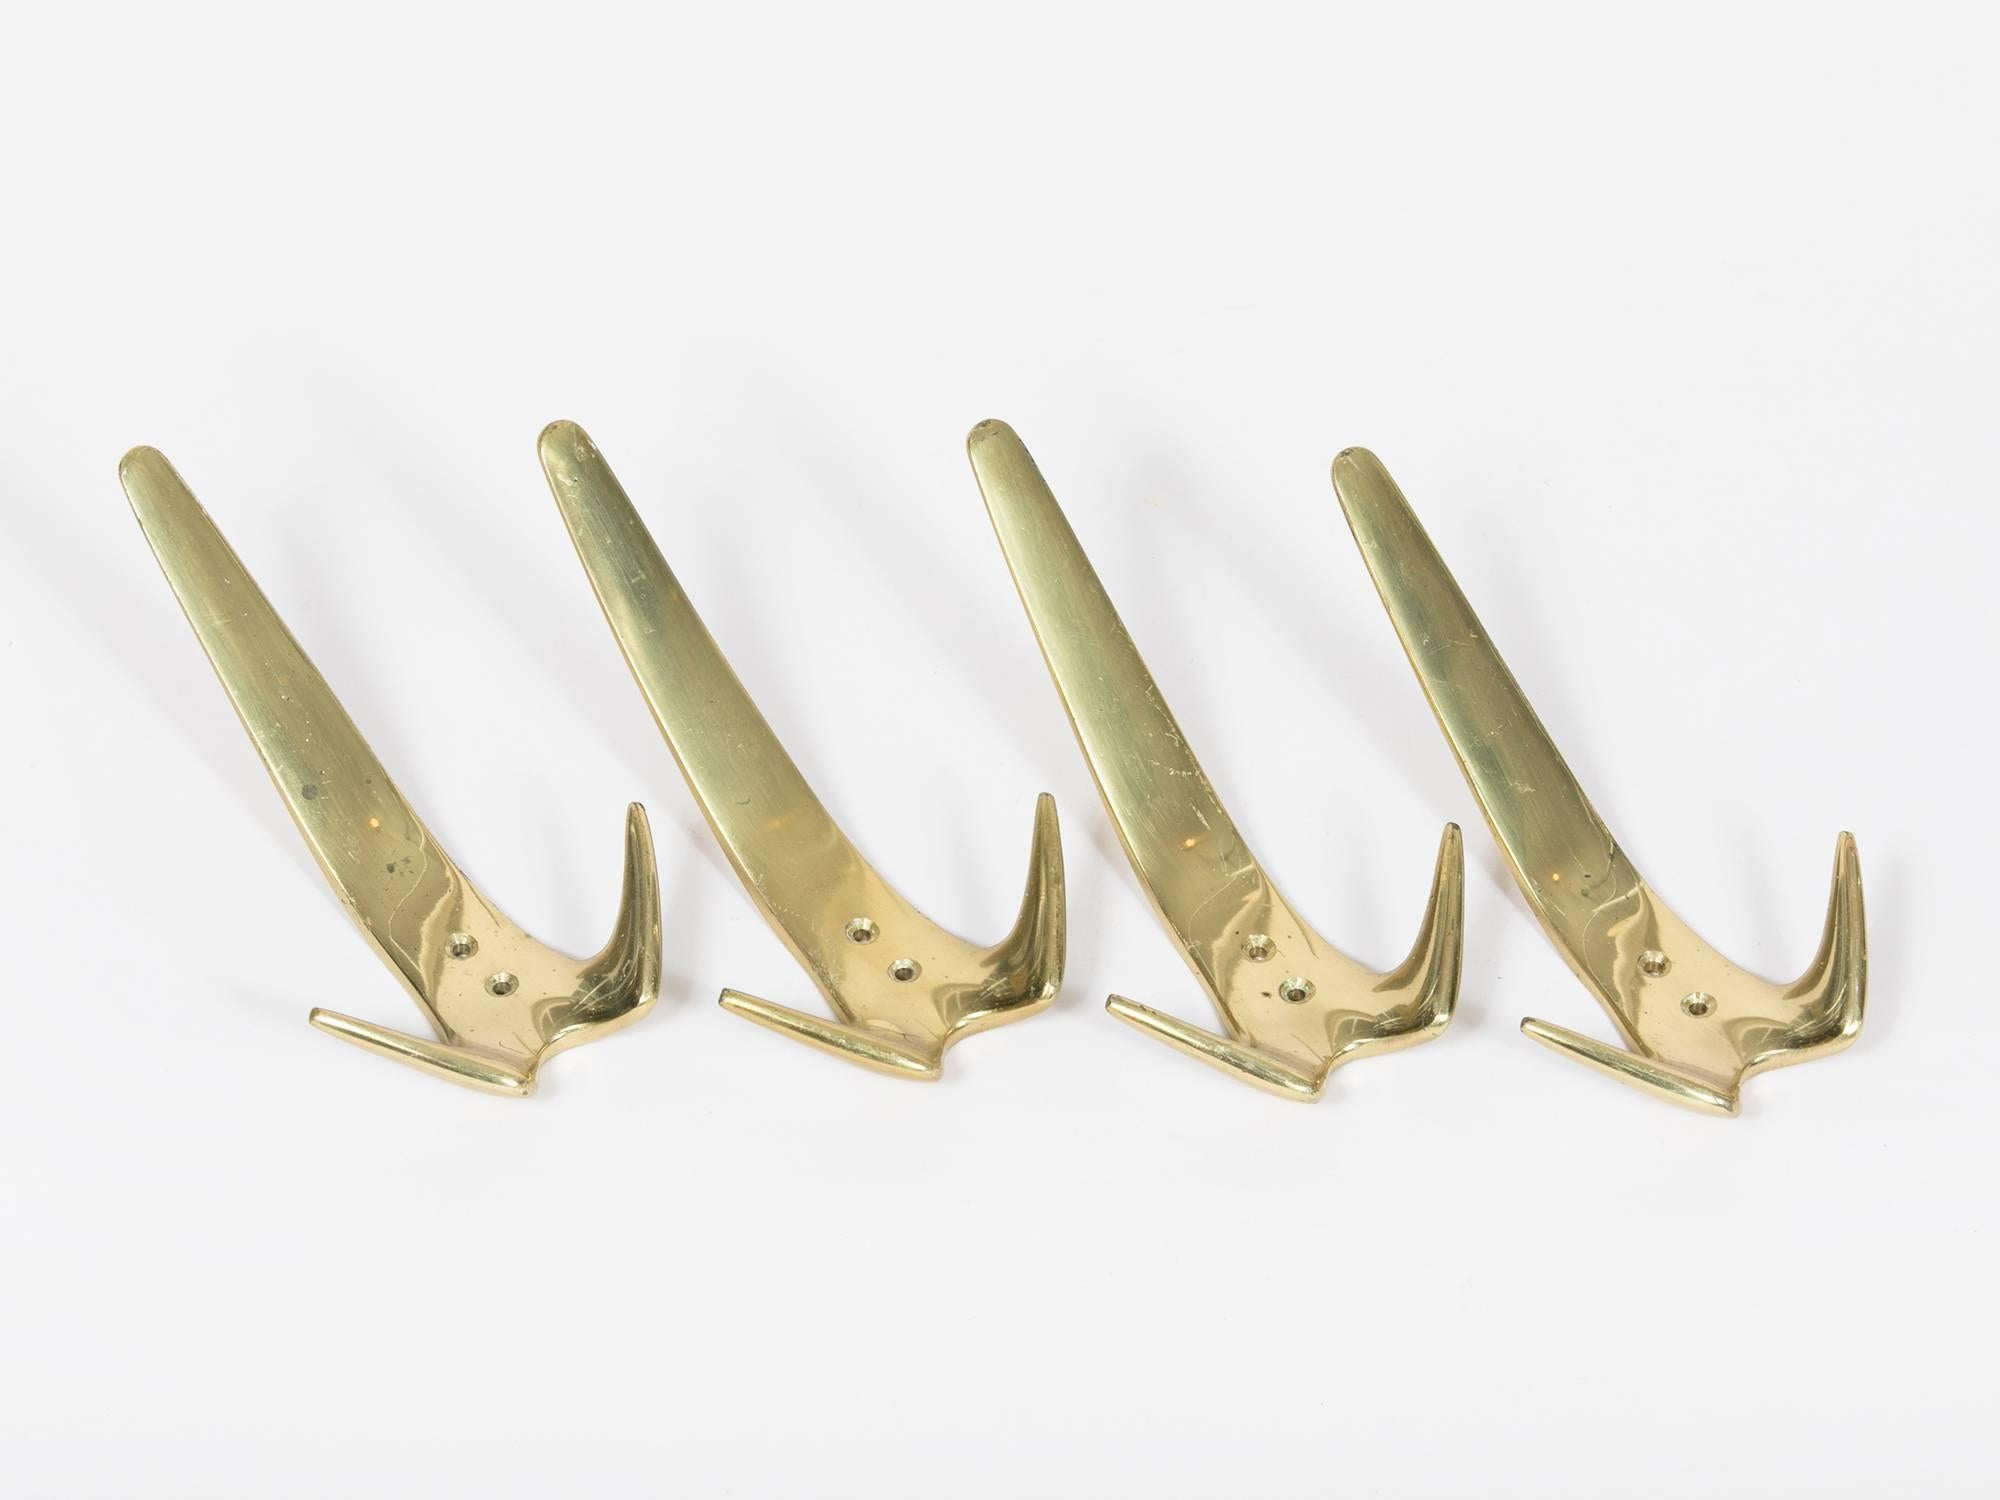 Large modernist cast brass wall hooks by Viennese designer Carl Auböck. Original works from the 1950s. Sold separately; four available.